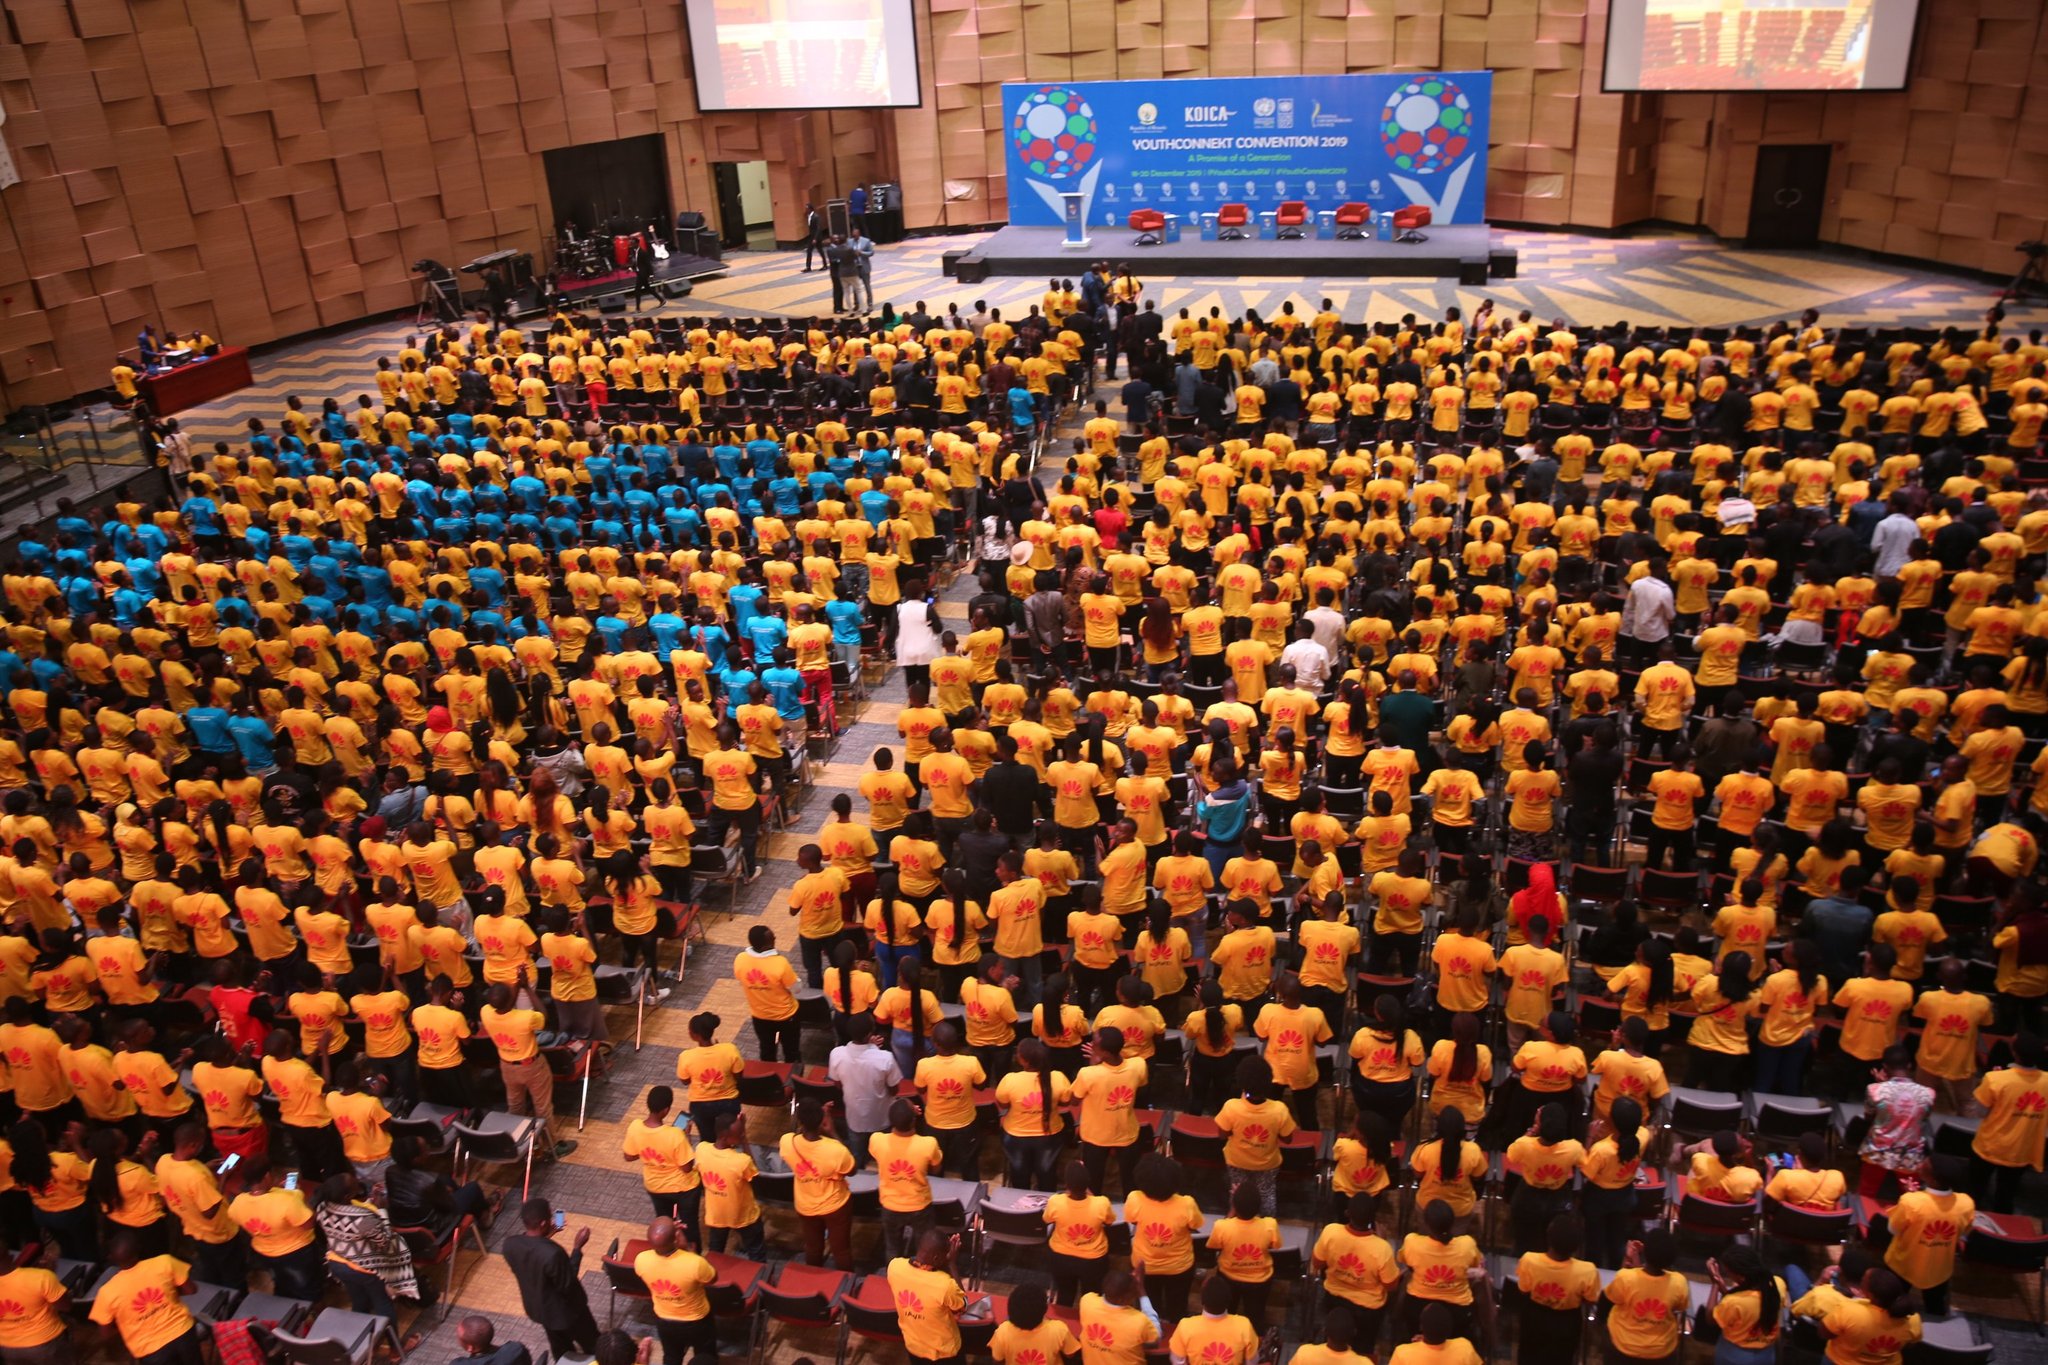 Over 3000 youths taking part in YouthConnekt Convention 2019 at Intare Conference Arena on 18 Wednesday./Courtesy